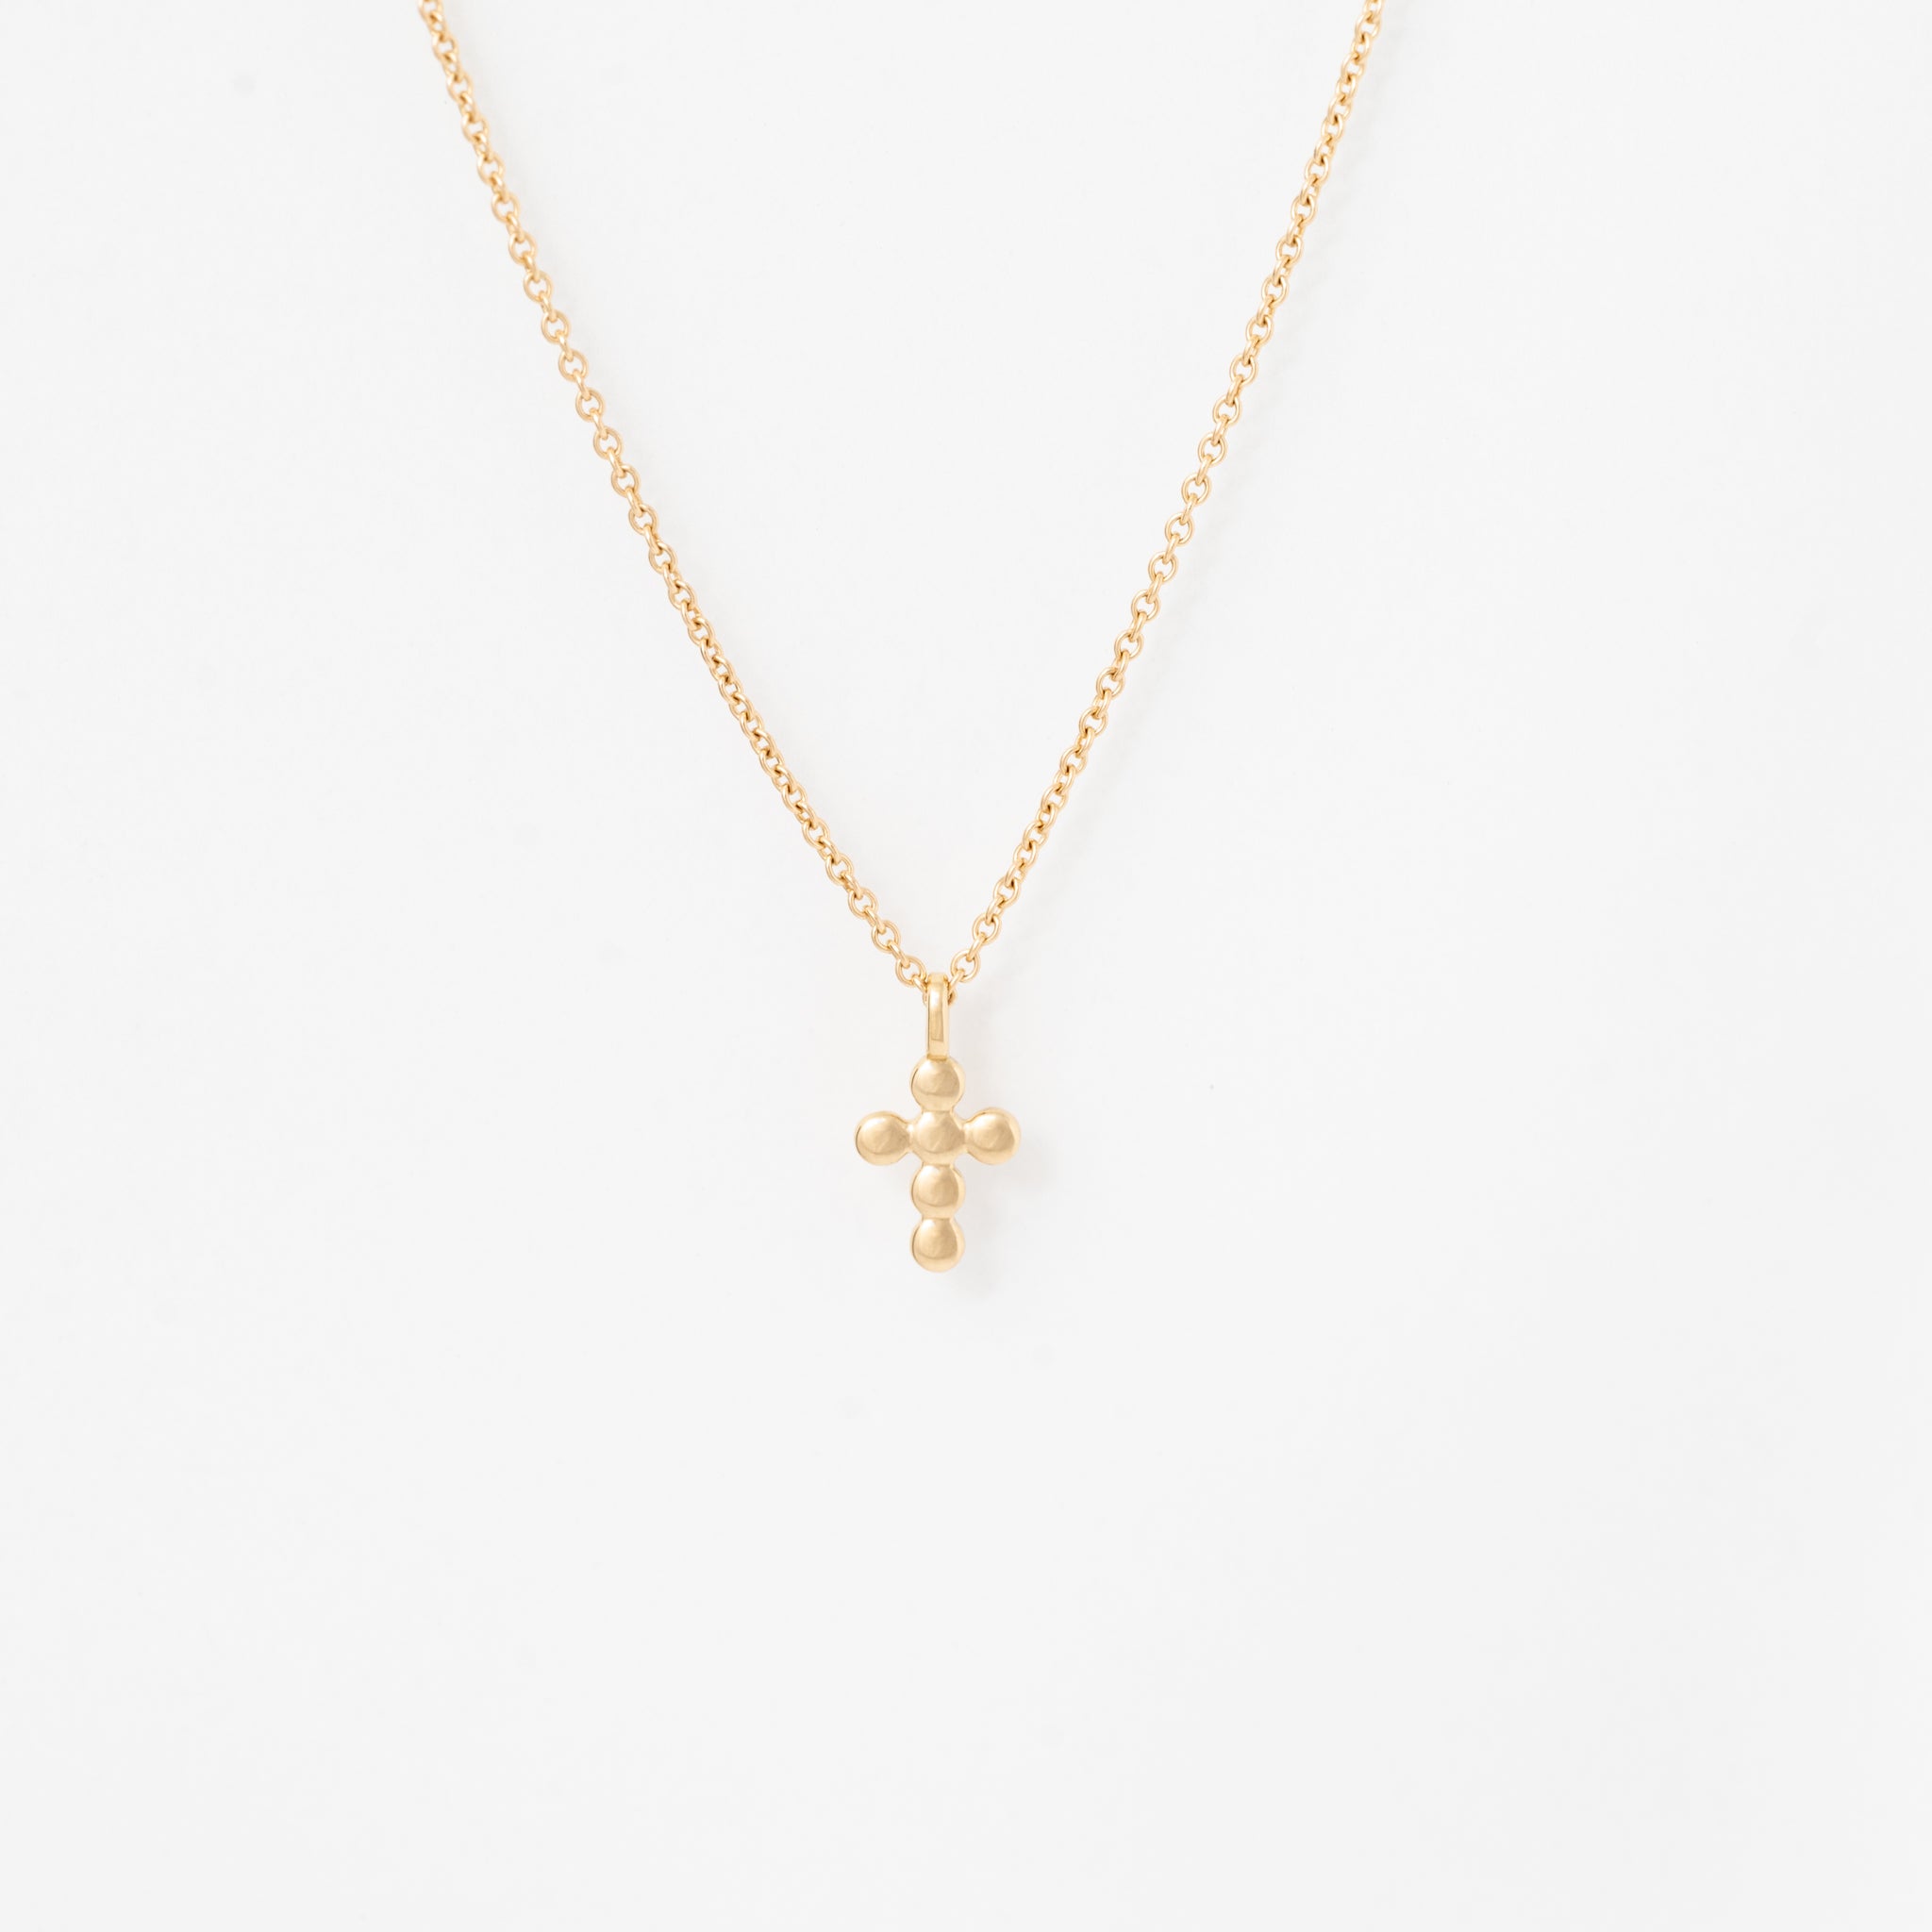 Gold Cross Pendant & Chain Necklaces - 3 Pack